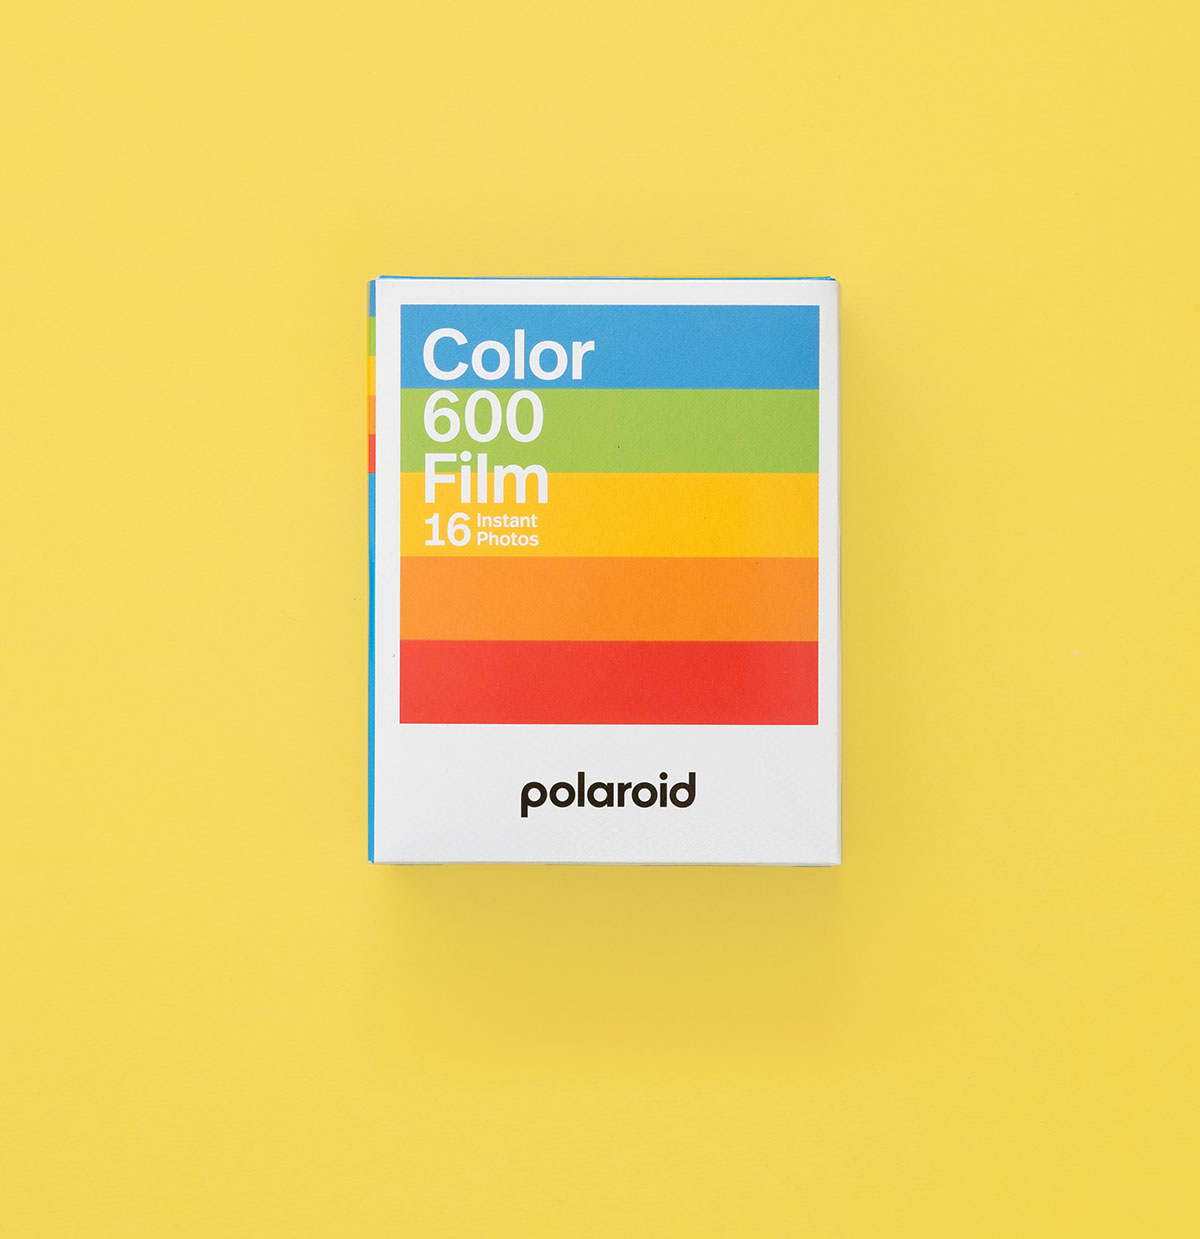 Polaroid Instant Camera and 8-Pack Color 600 Film